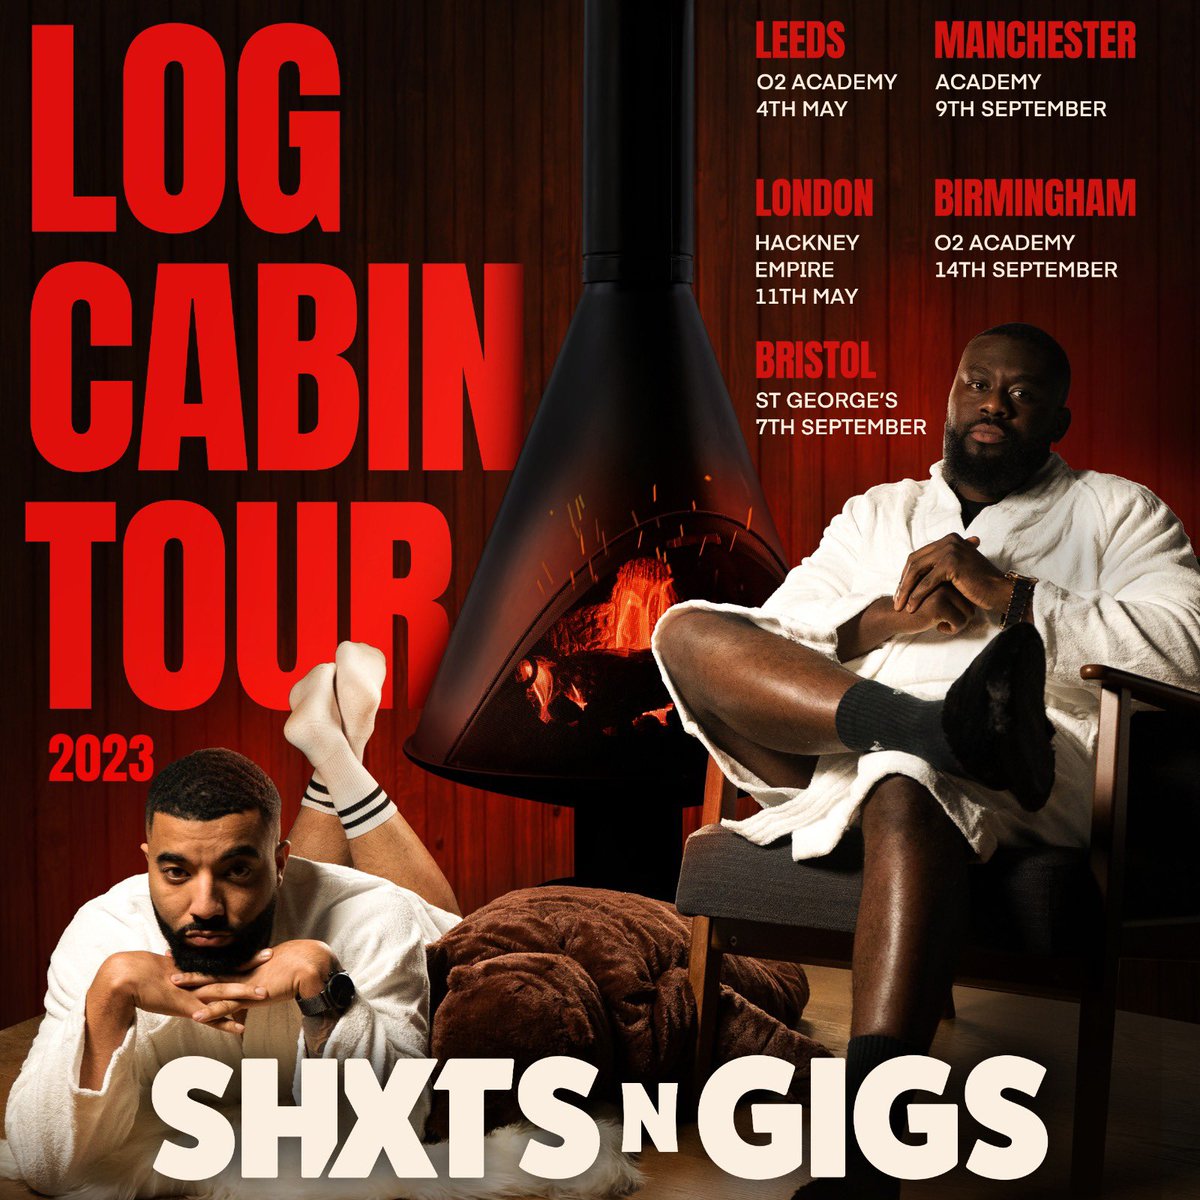 I I on Twitter "RT shxtsngigs WE PRESENT TO YOU THE LOG CABIN TOUR